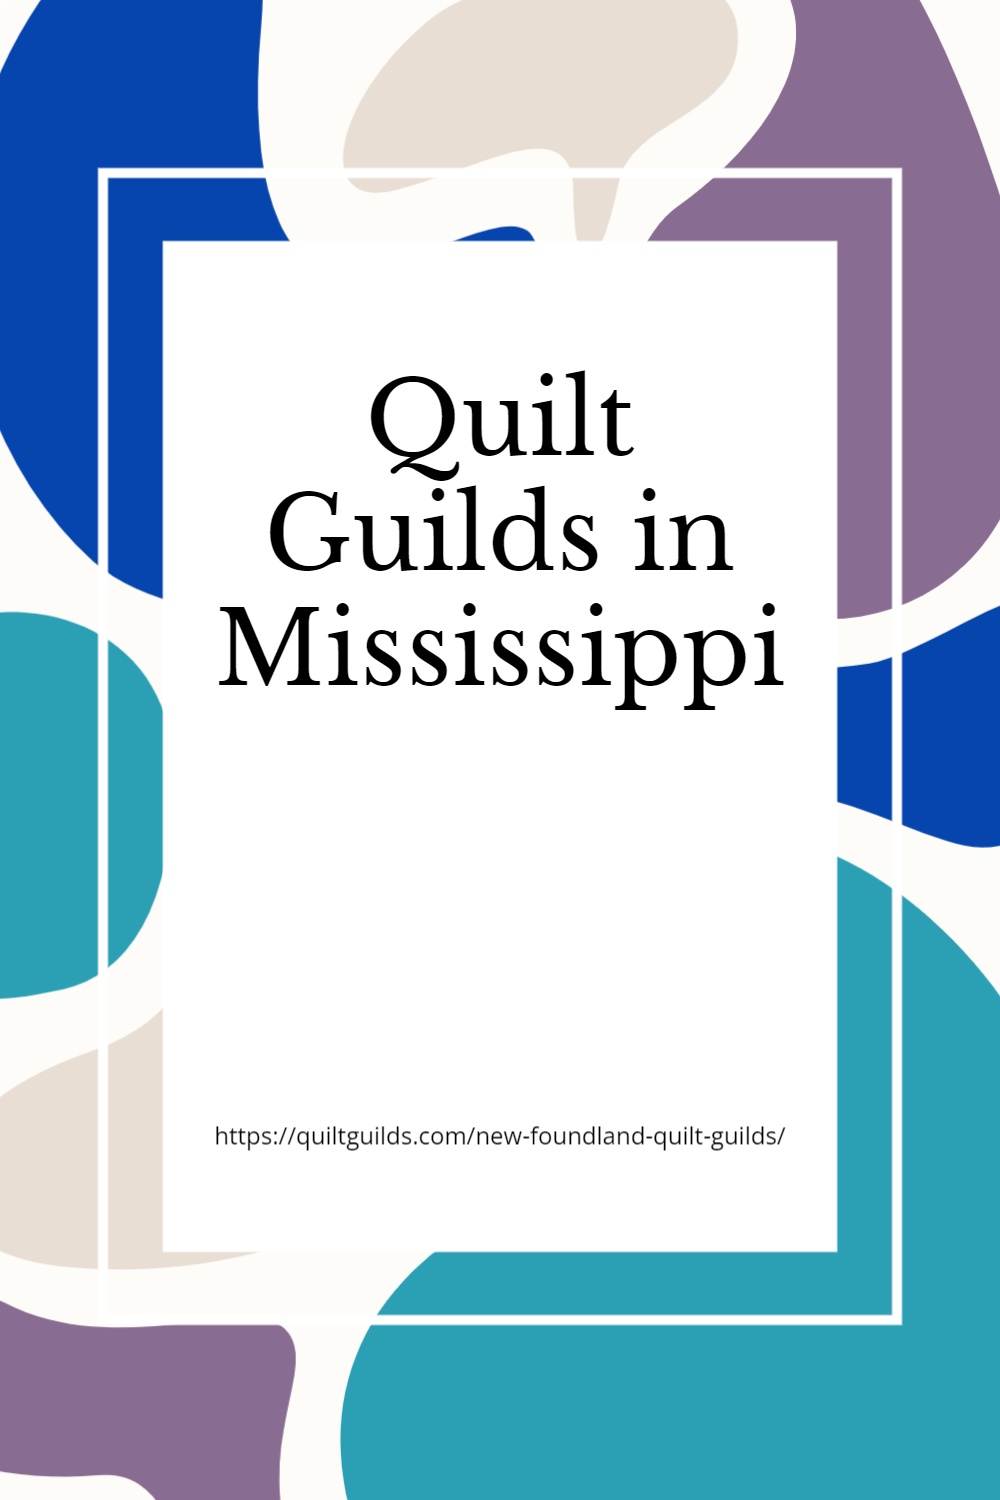 Quilting Guilds in Mississippi for quilters